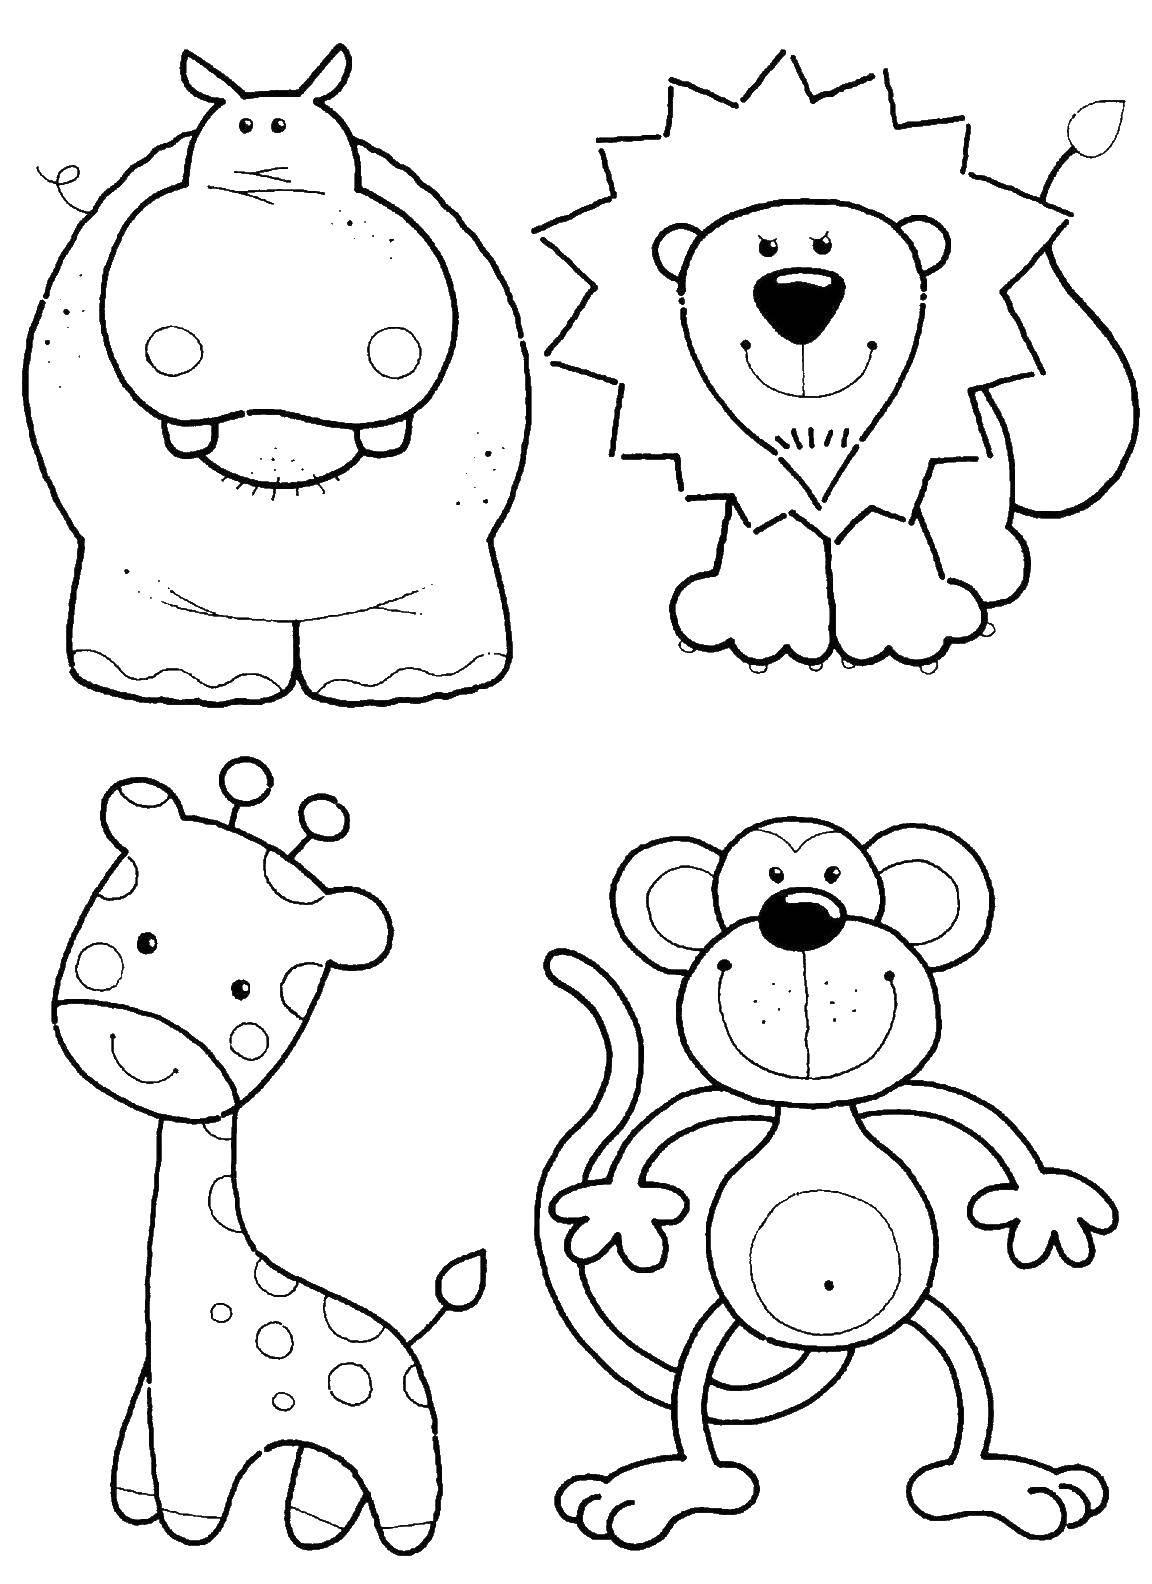 Coloring Hippo, monkey, lion and ... ... . Category animals. Tags:  Hippo, monkey, lion, .......